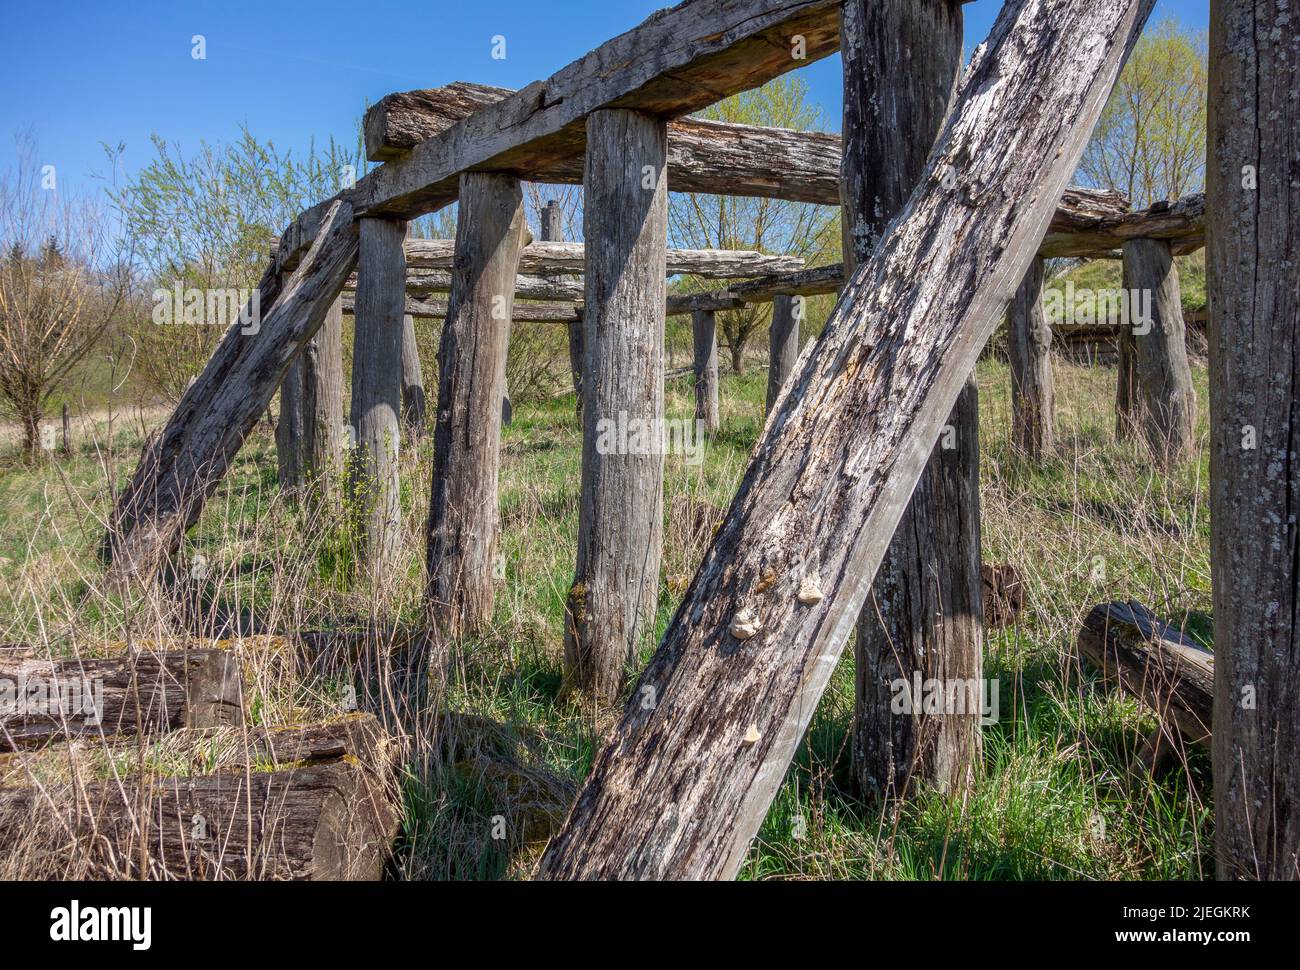 Rundown medieval wooden building remains in sunny ambiance at early spring time Stock Photo